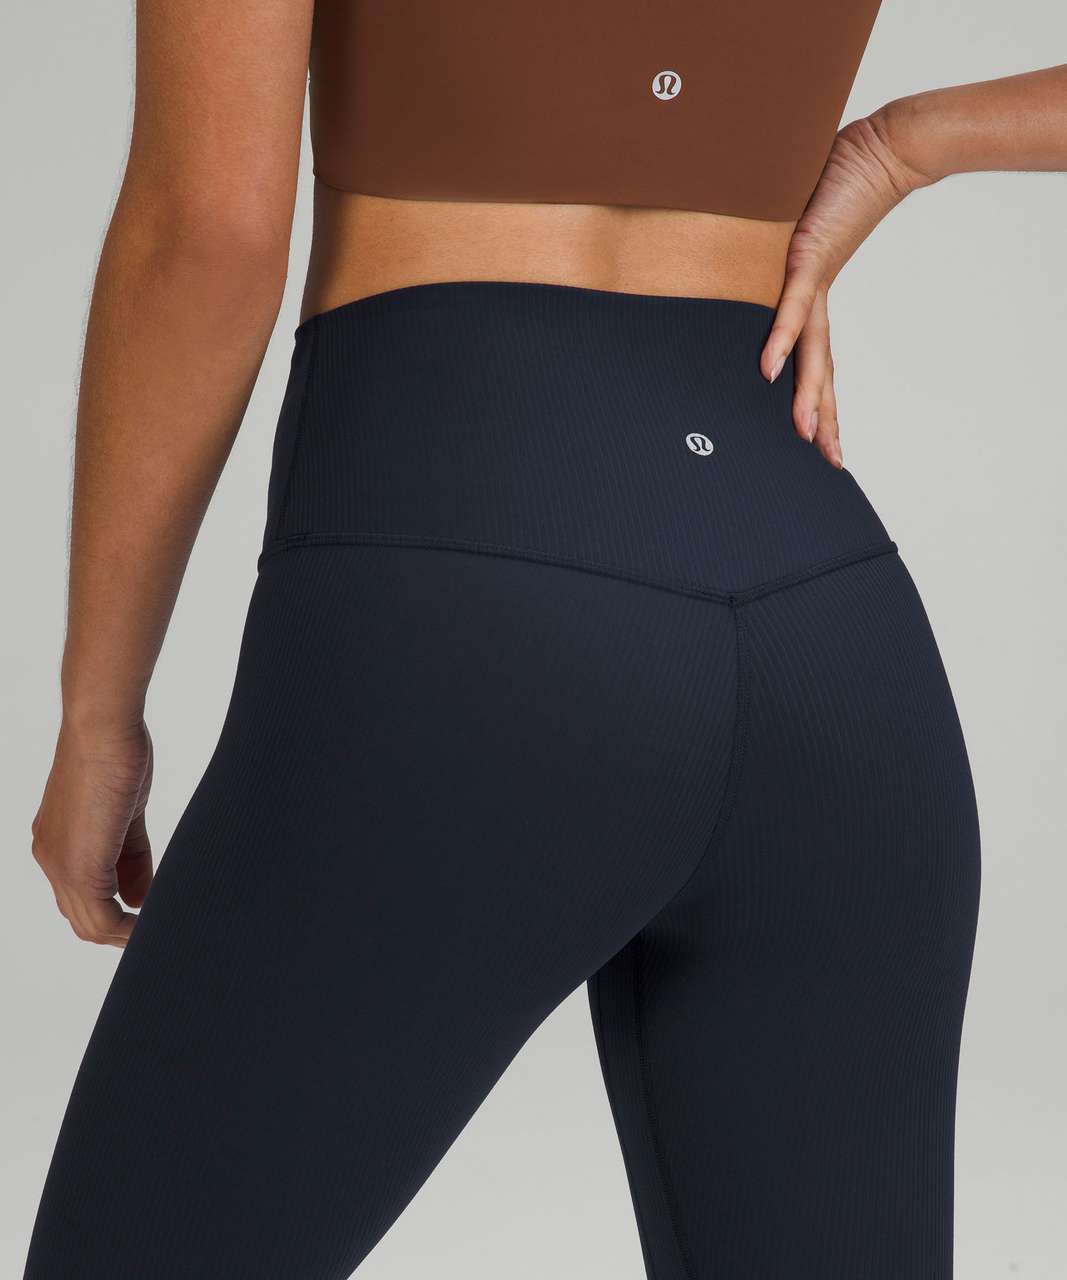 Lululemon Align HR Pant 28” Size 6 Black New With Tags Authentic